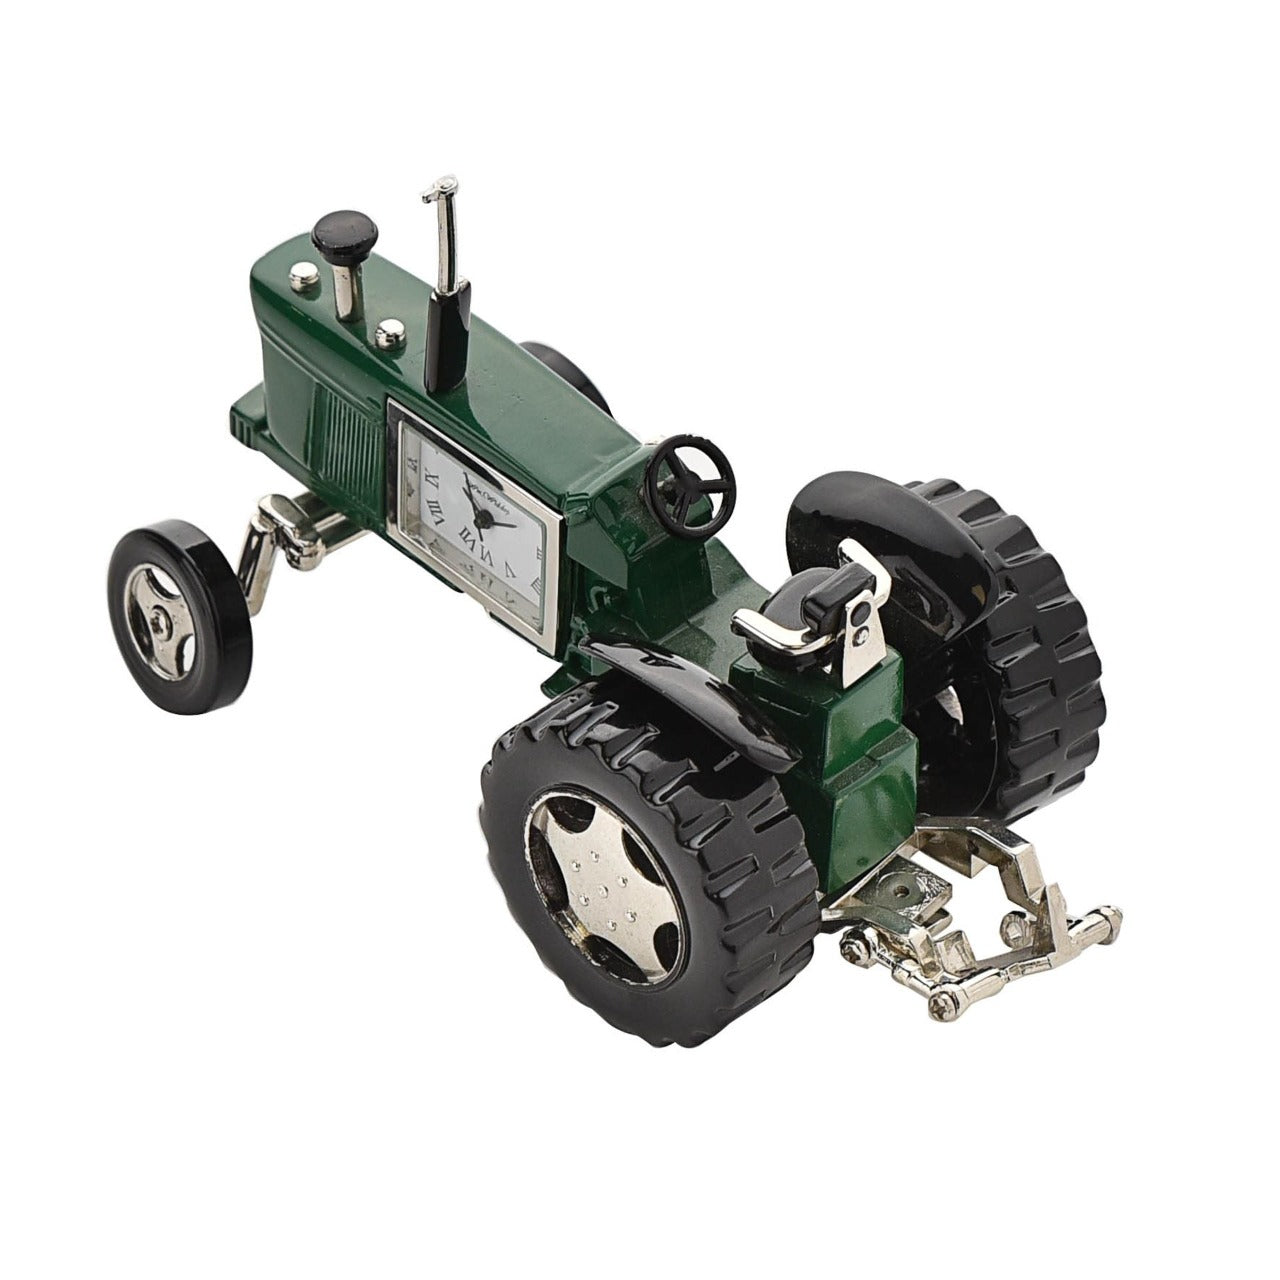 Miniature Clock Farmers Green Tractor by William Widdop  Bring a unique and quirky touch to the home with this stylish miniature clock made with great attention to detail.  The miniature tractor is a great gift for someone who has an interest in the farming world.